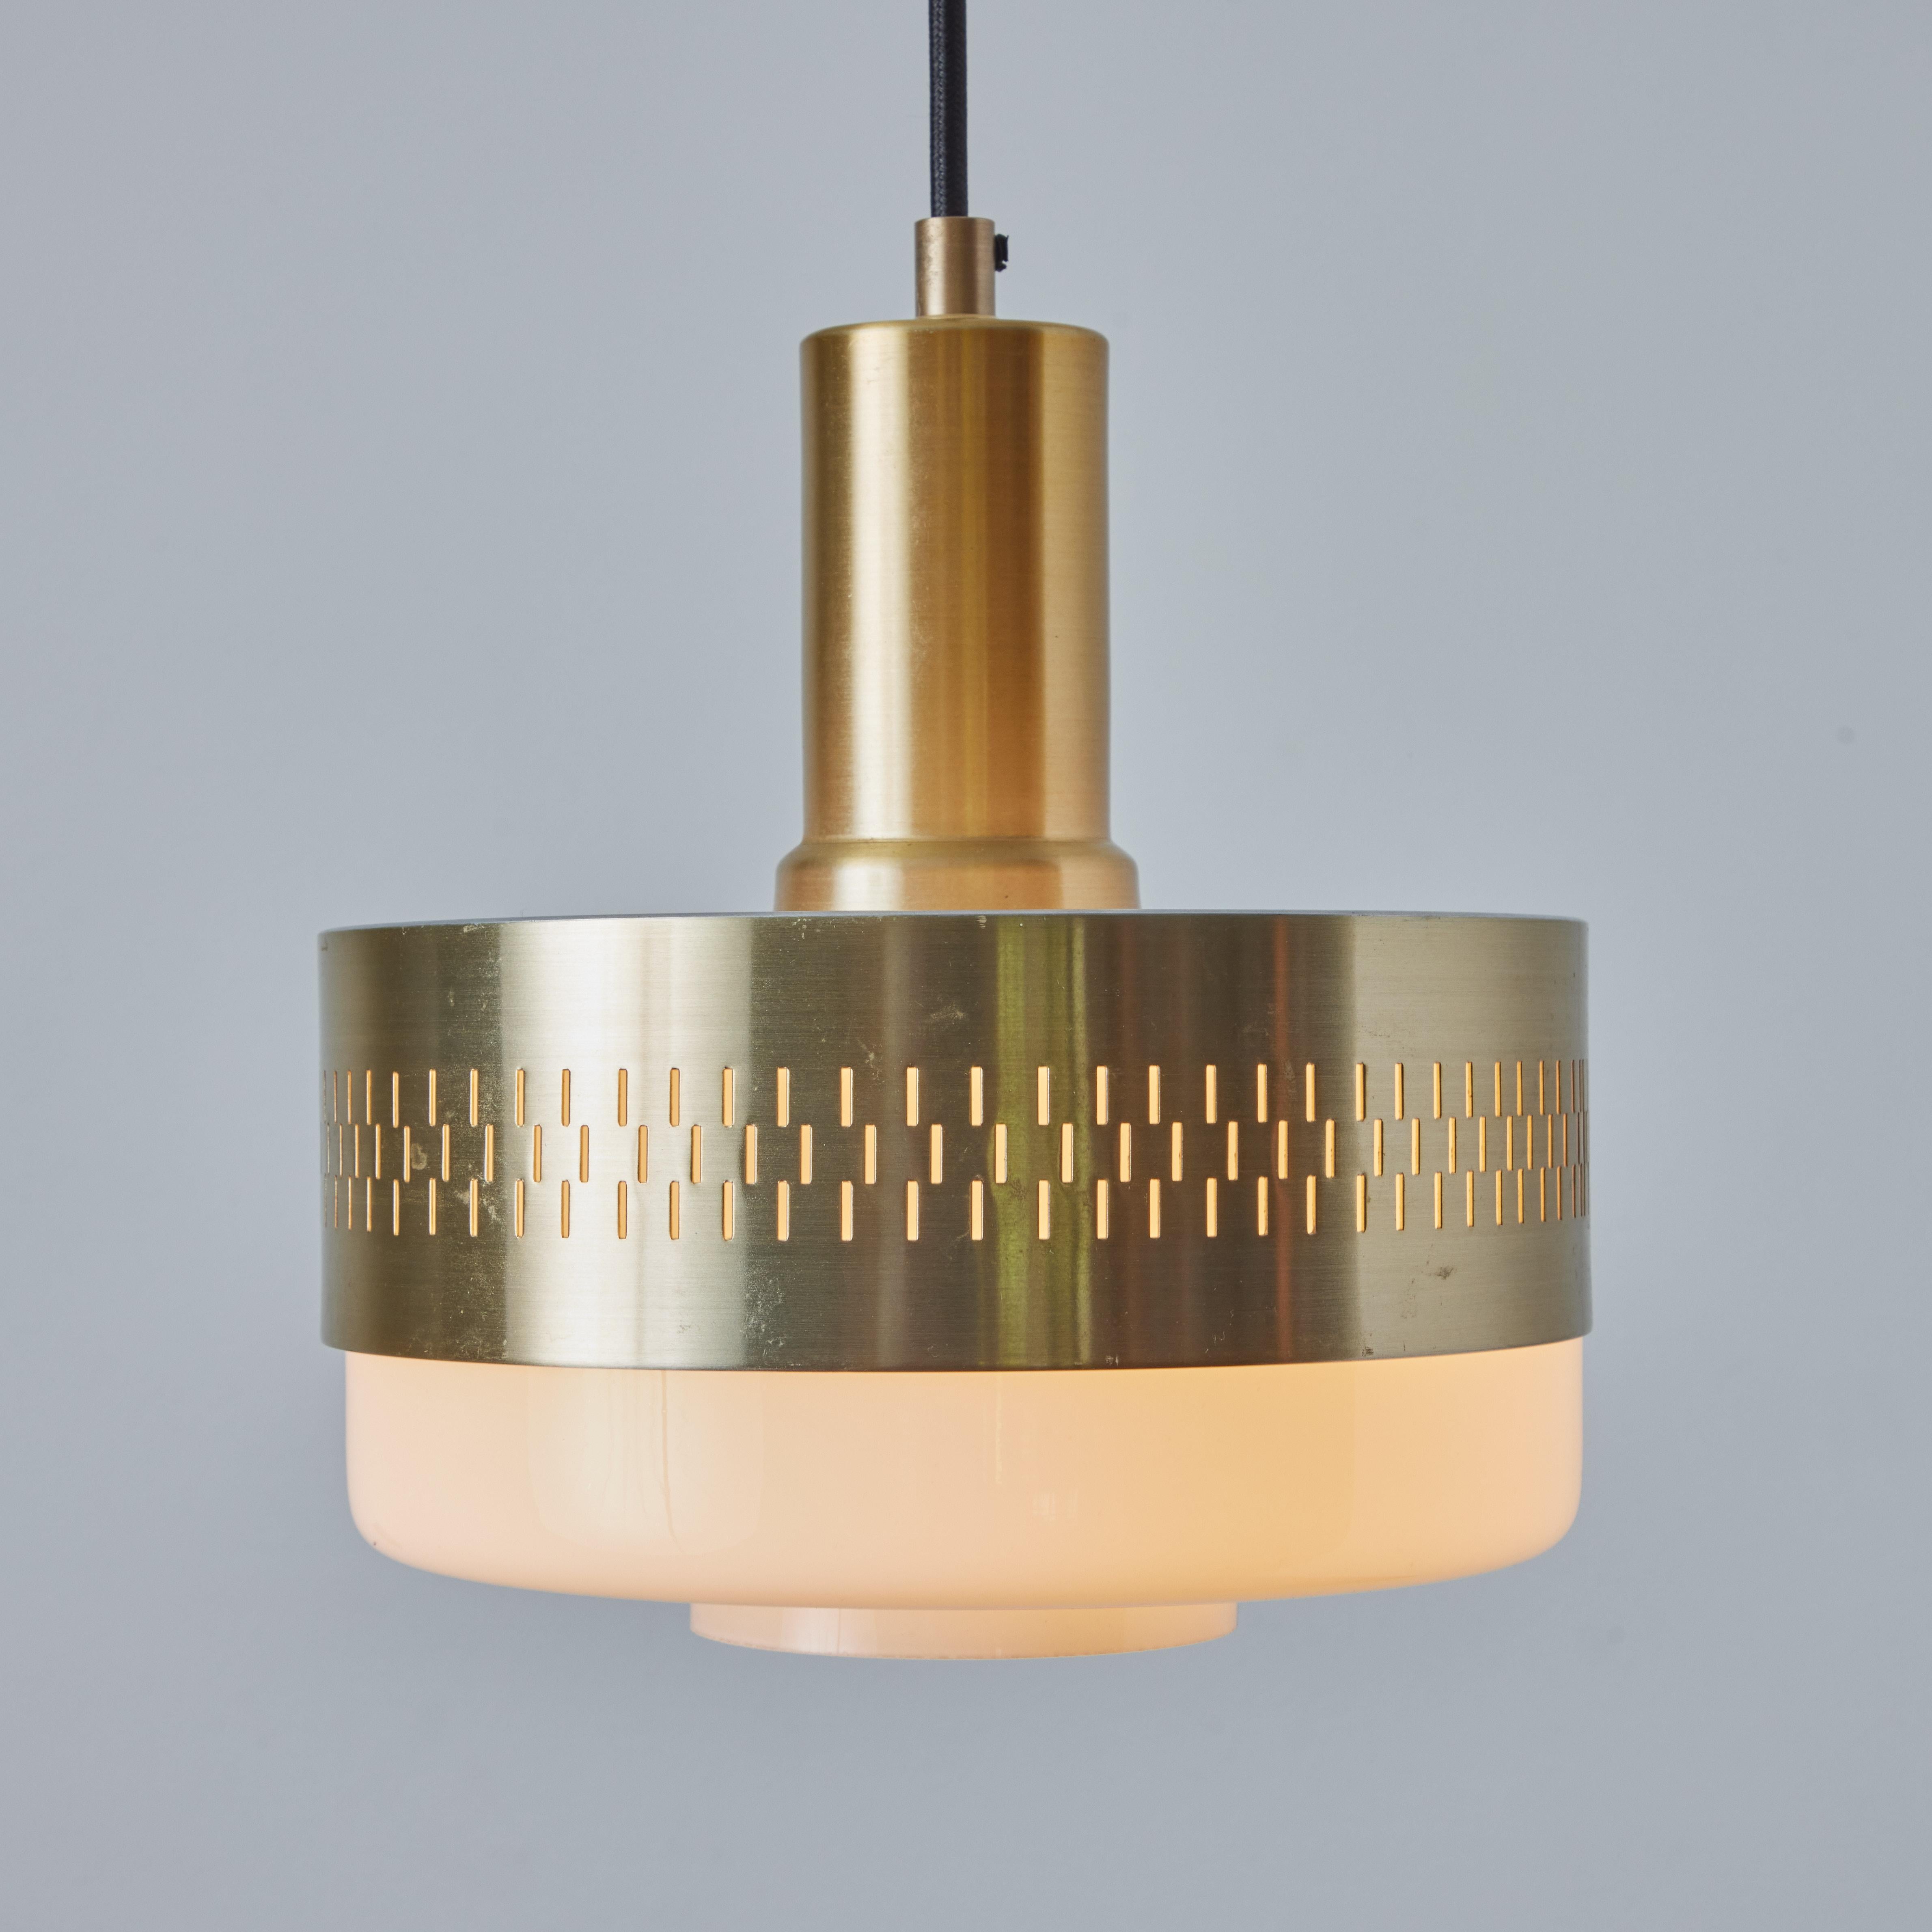 1960s Perforated Brass & Glass Pendant Attributed to Hans-Agne Jakobsson For Sale 3